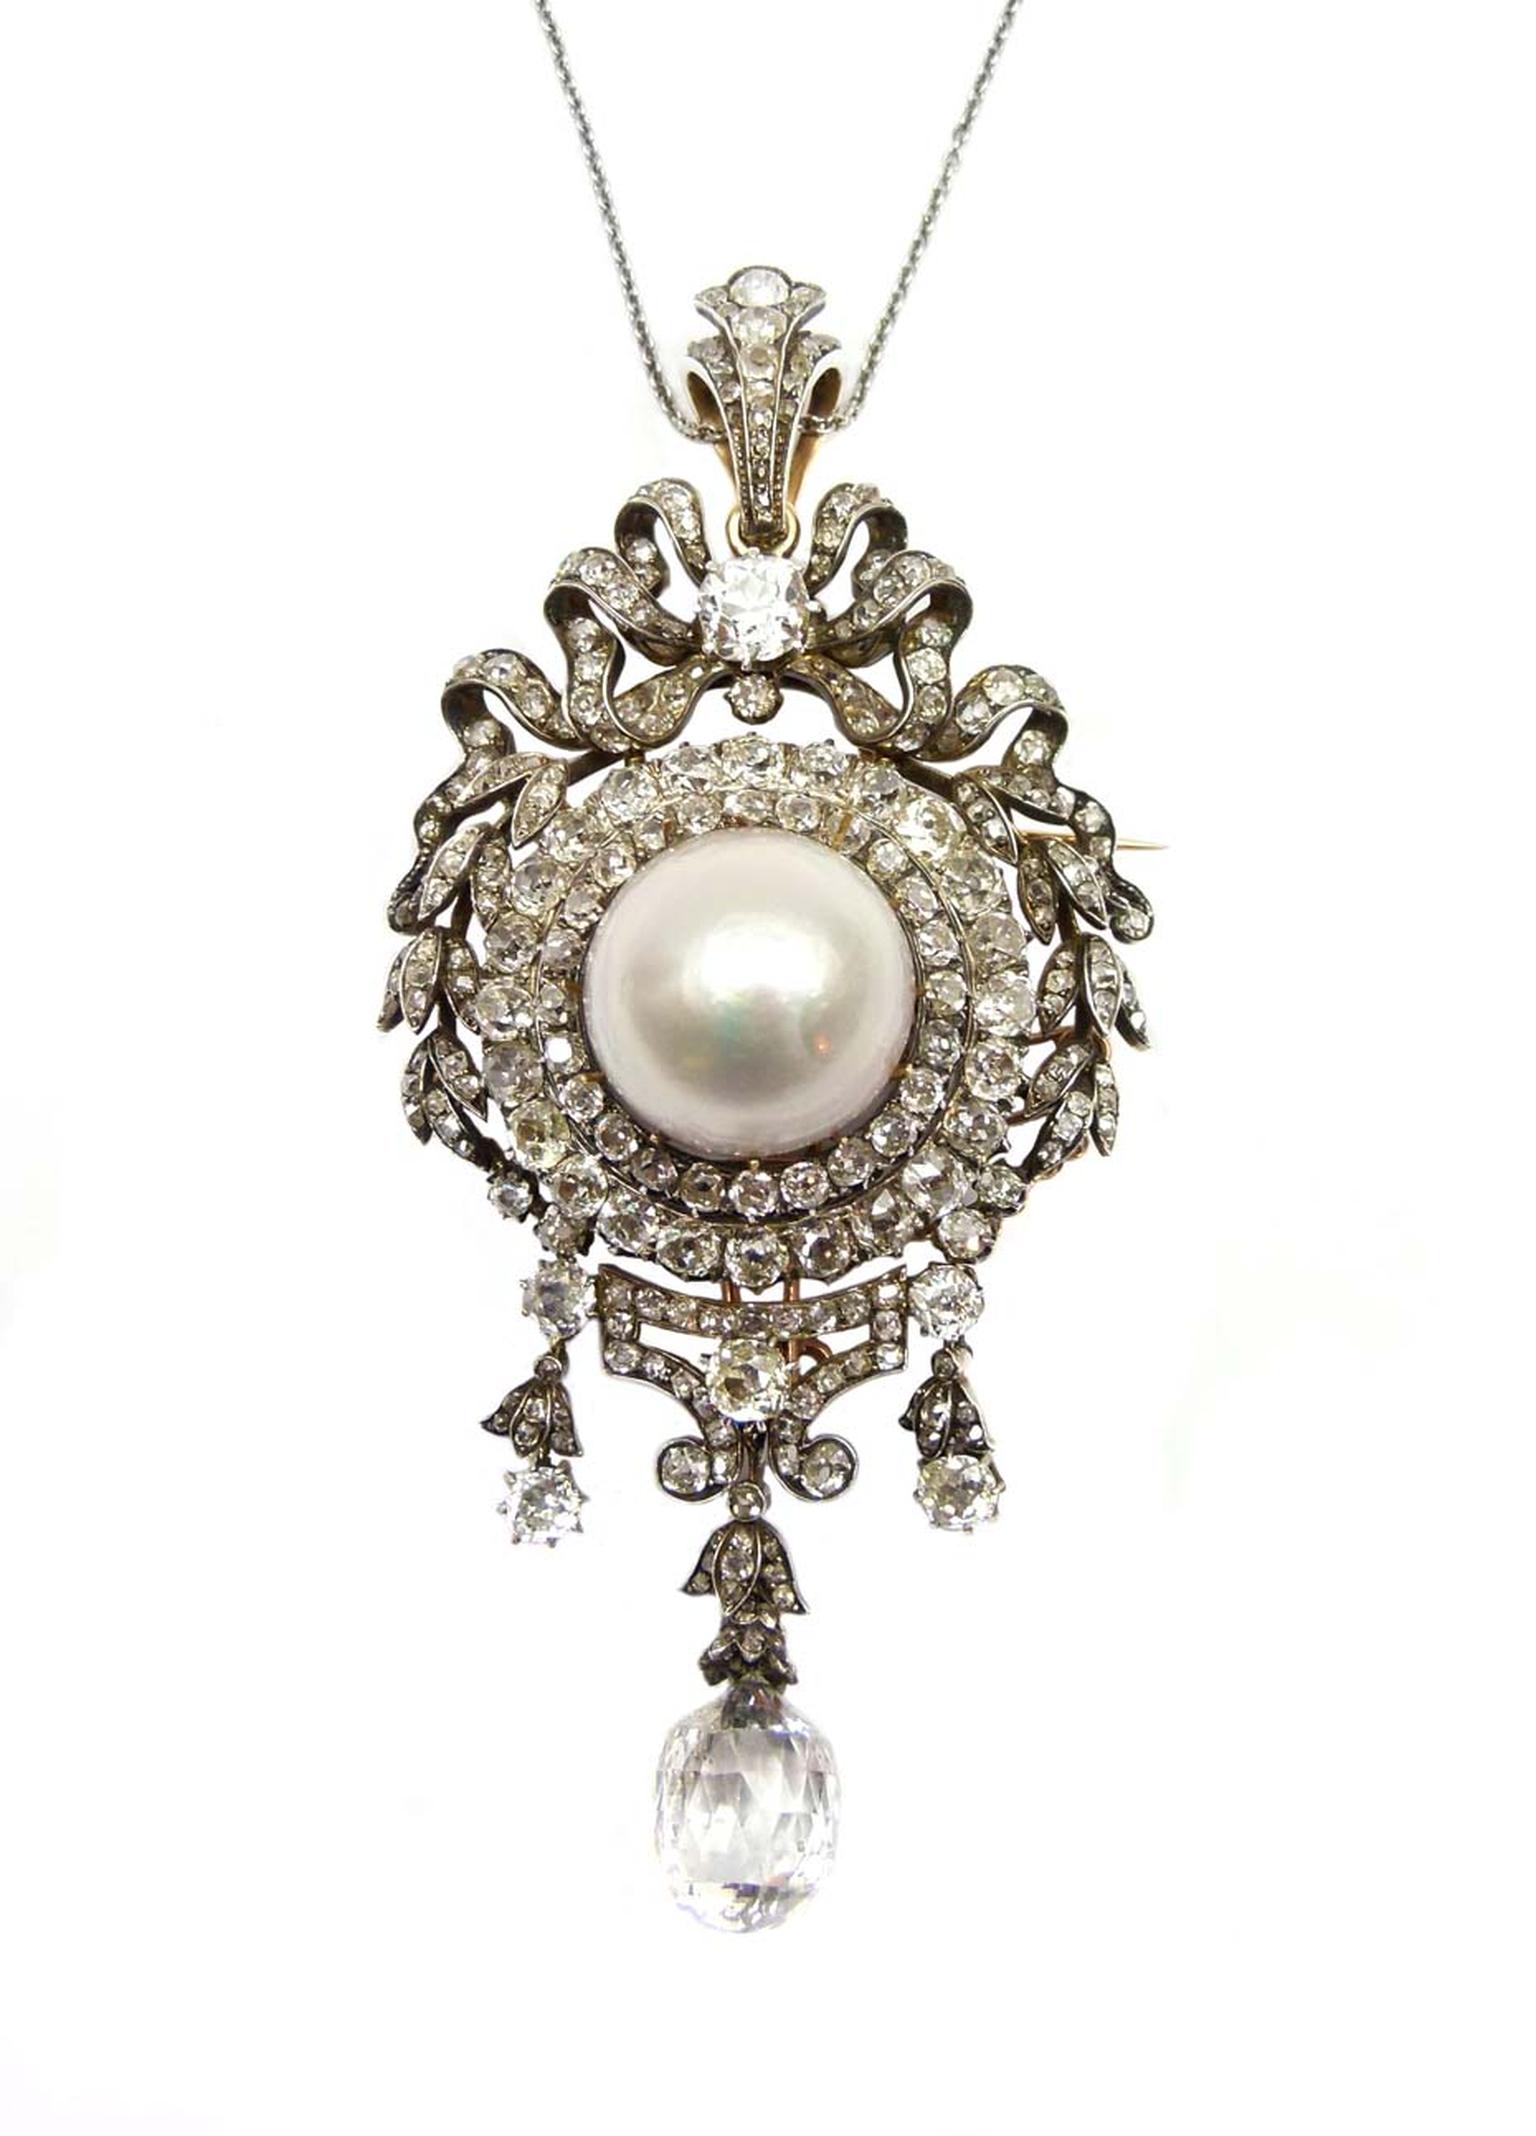 SJ Phillips has an eye-popping antique diamond and pearl locket circa 1860 with a double- whammy provenance. Worn by the Empress Eugénie, it later belonged to Alice Liddell (of Wonderland) and can be yours for $5 million.